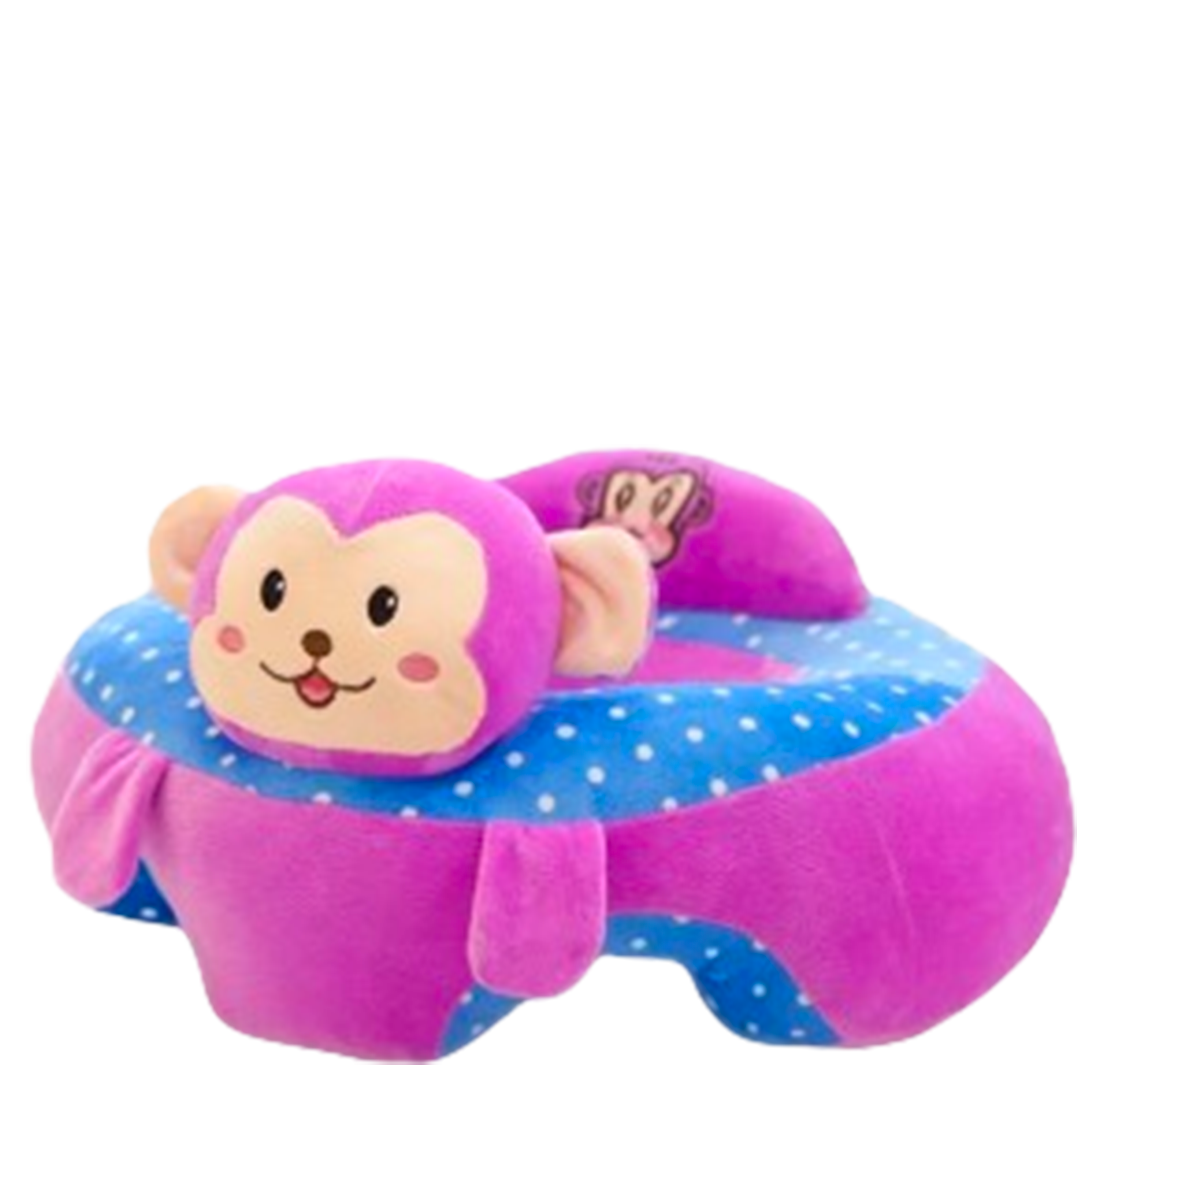 COUSSIN D’ASSISE POUR BEBE ROSE